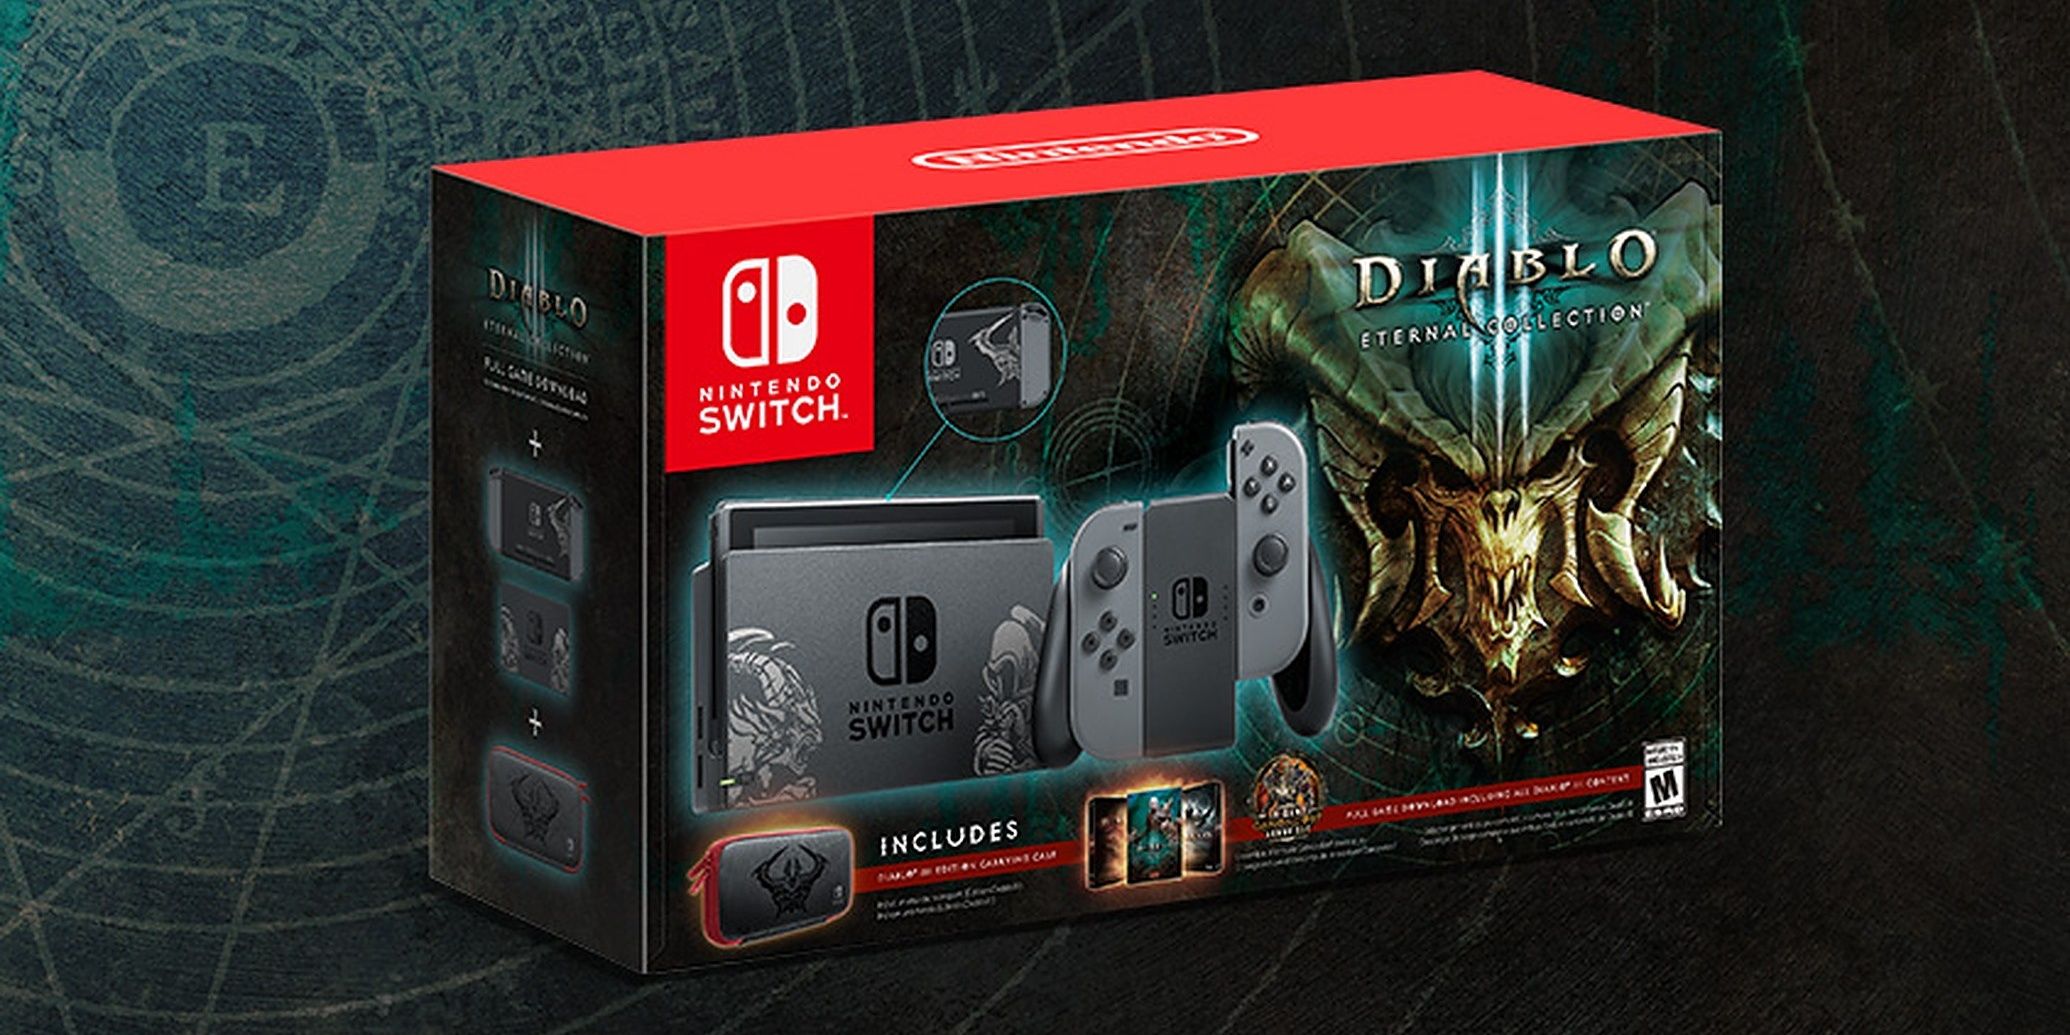 Diablo 3 Eternal Collection Switch